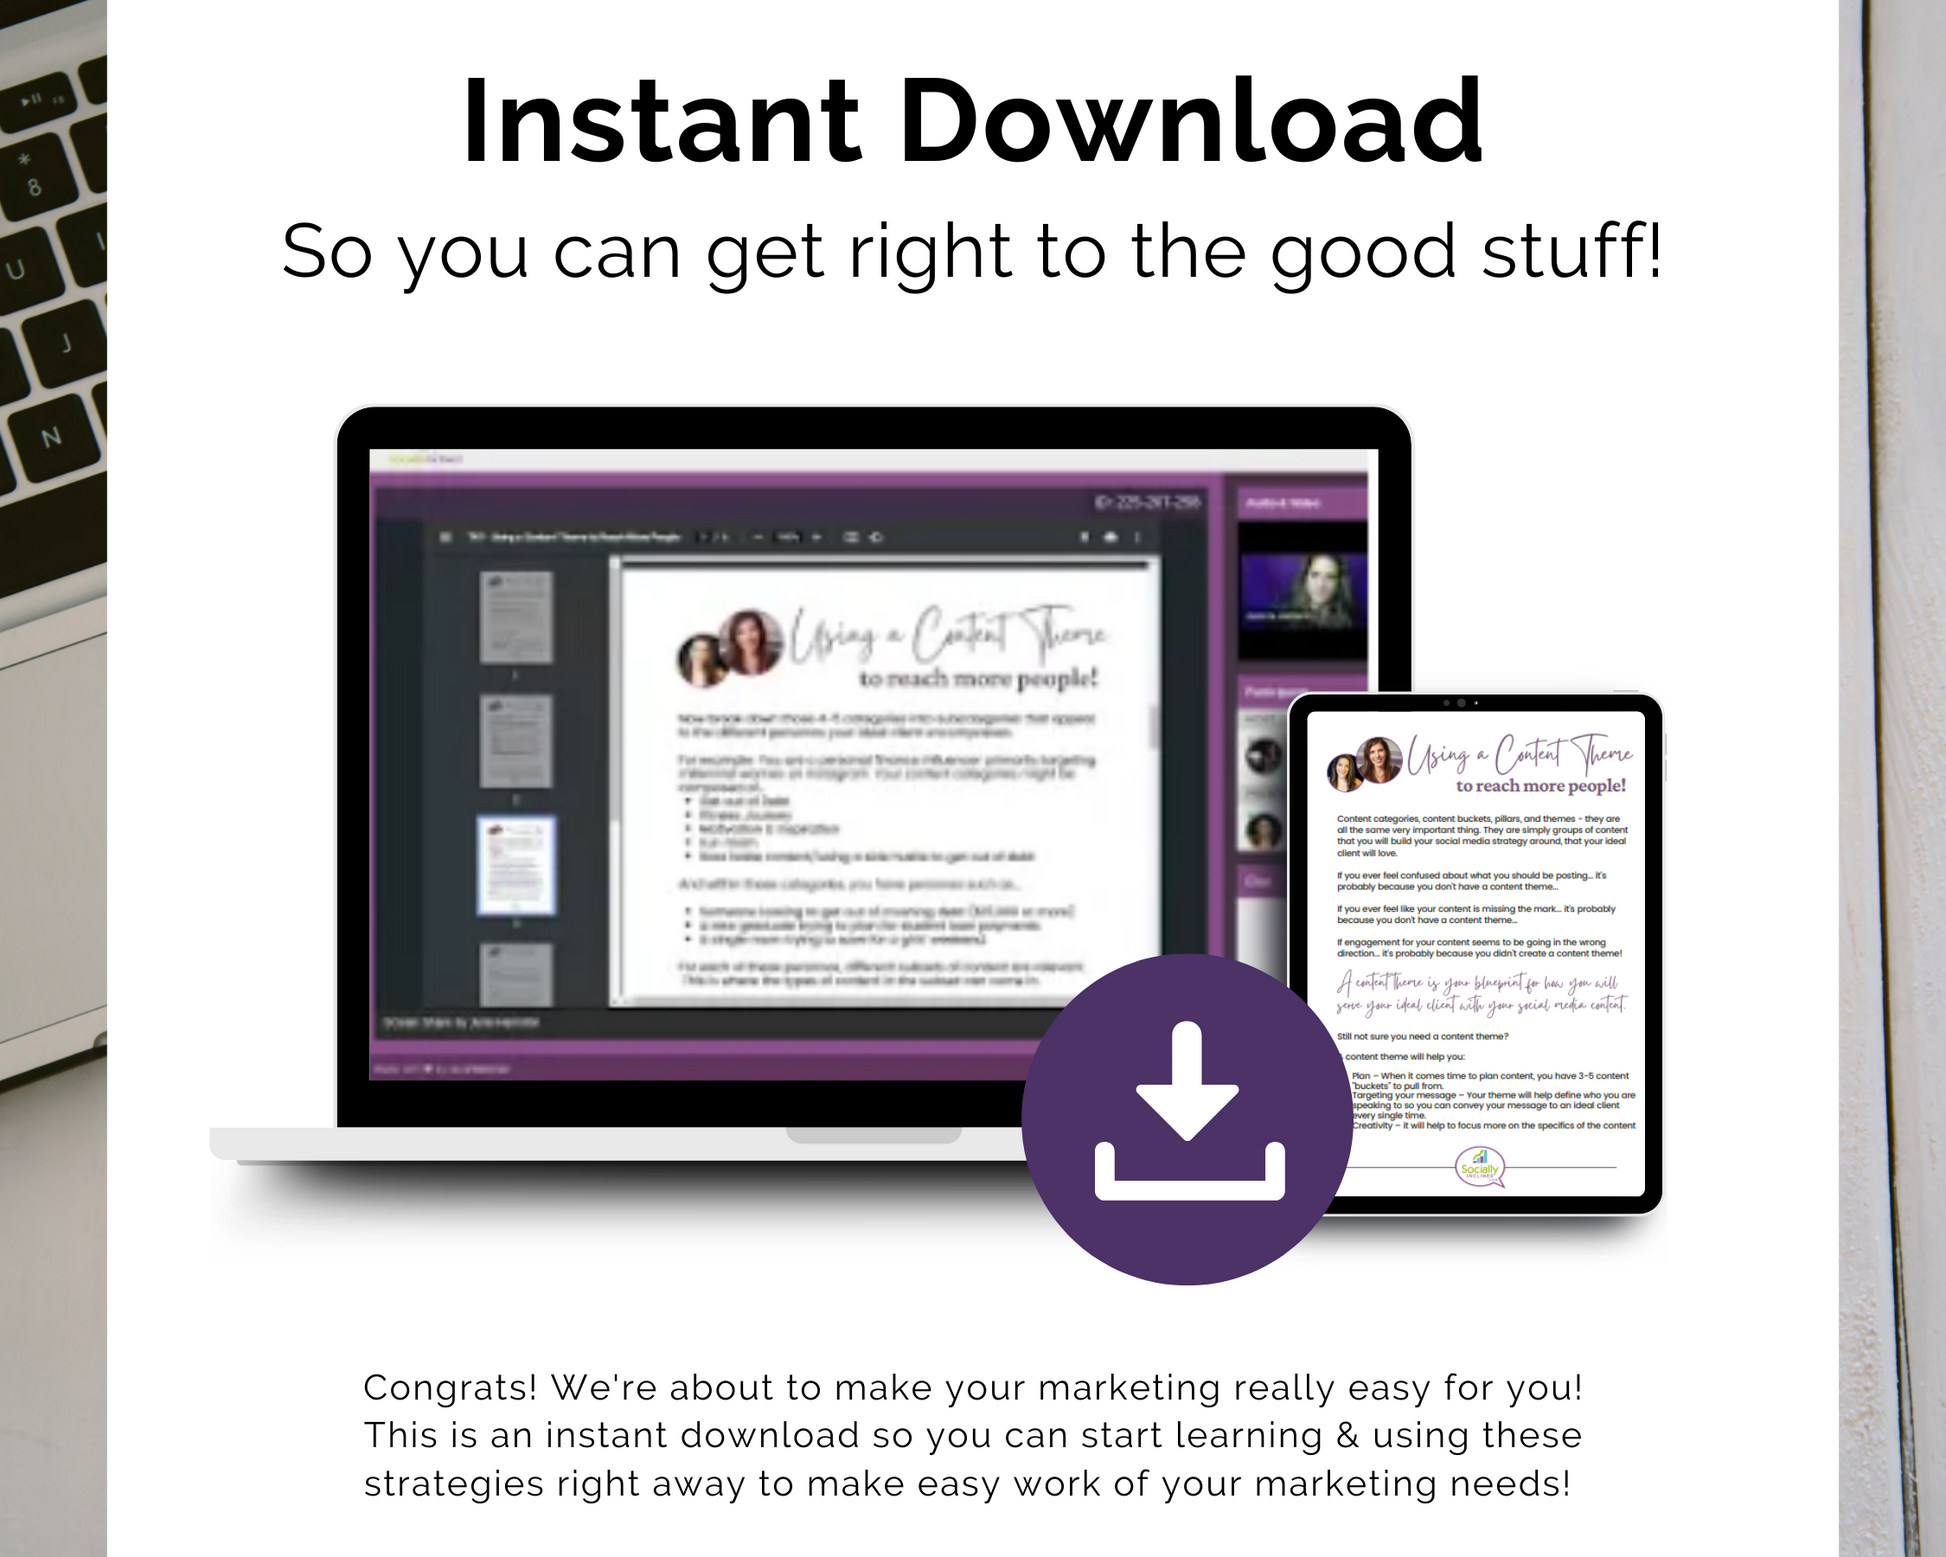 Instantly download the TAT - Using Content Themes to Reach More People Masterclass from Get Socially Inclined so you can get right to the good stuff.